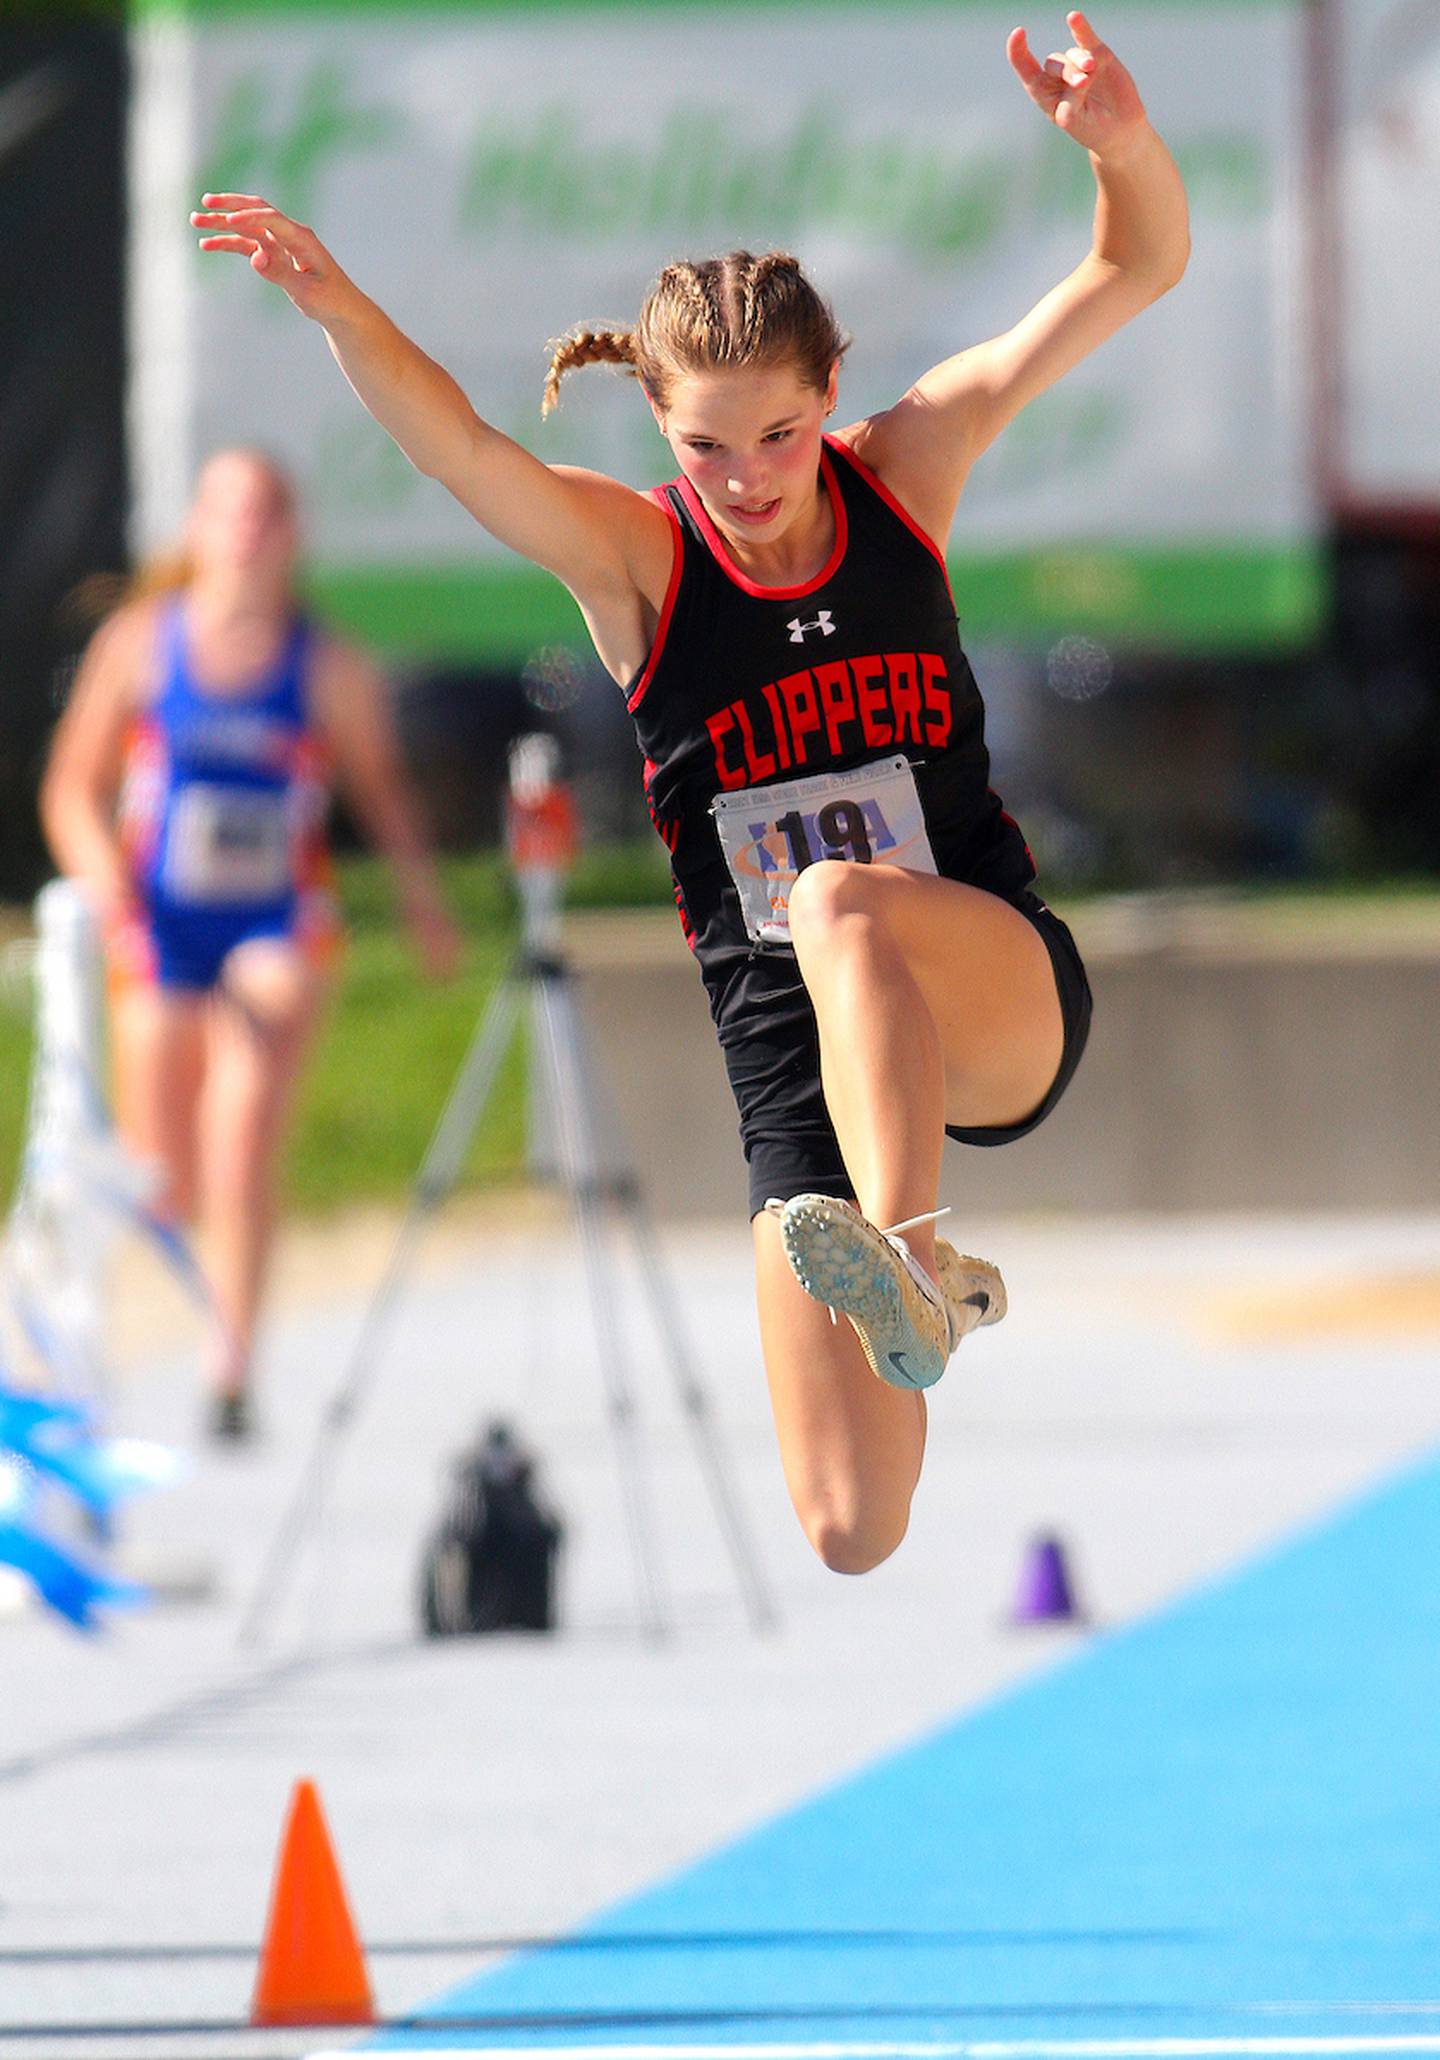 June 10, 2021 - Charleston, Illinois - Amboy's Elly Jones leaps through the air during the Class 1A Triple Jump at the Illinois High School Association Track & Field State Finals.  (Photo: PhotoNews Media/Clark Brooks)